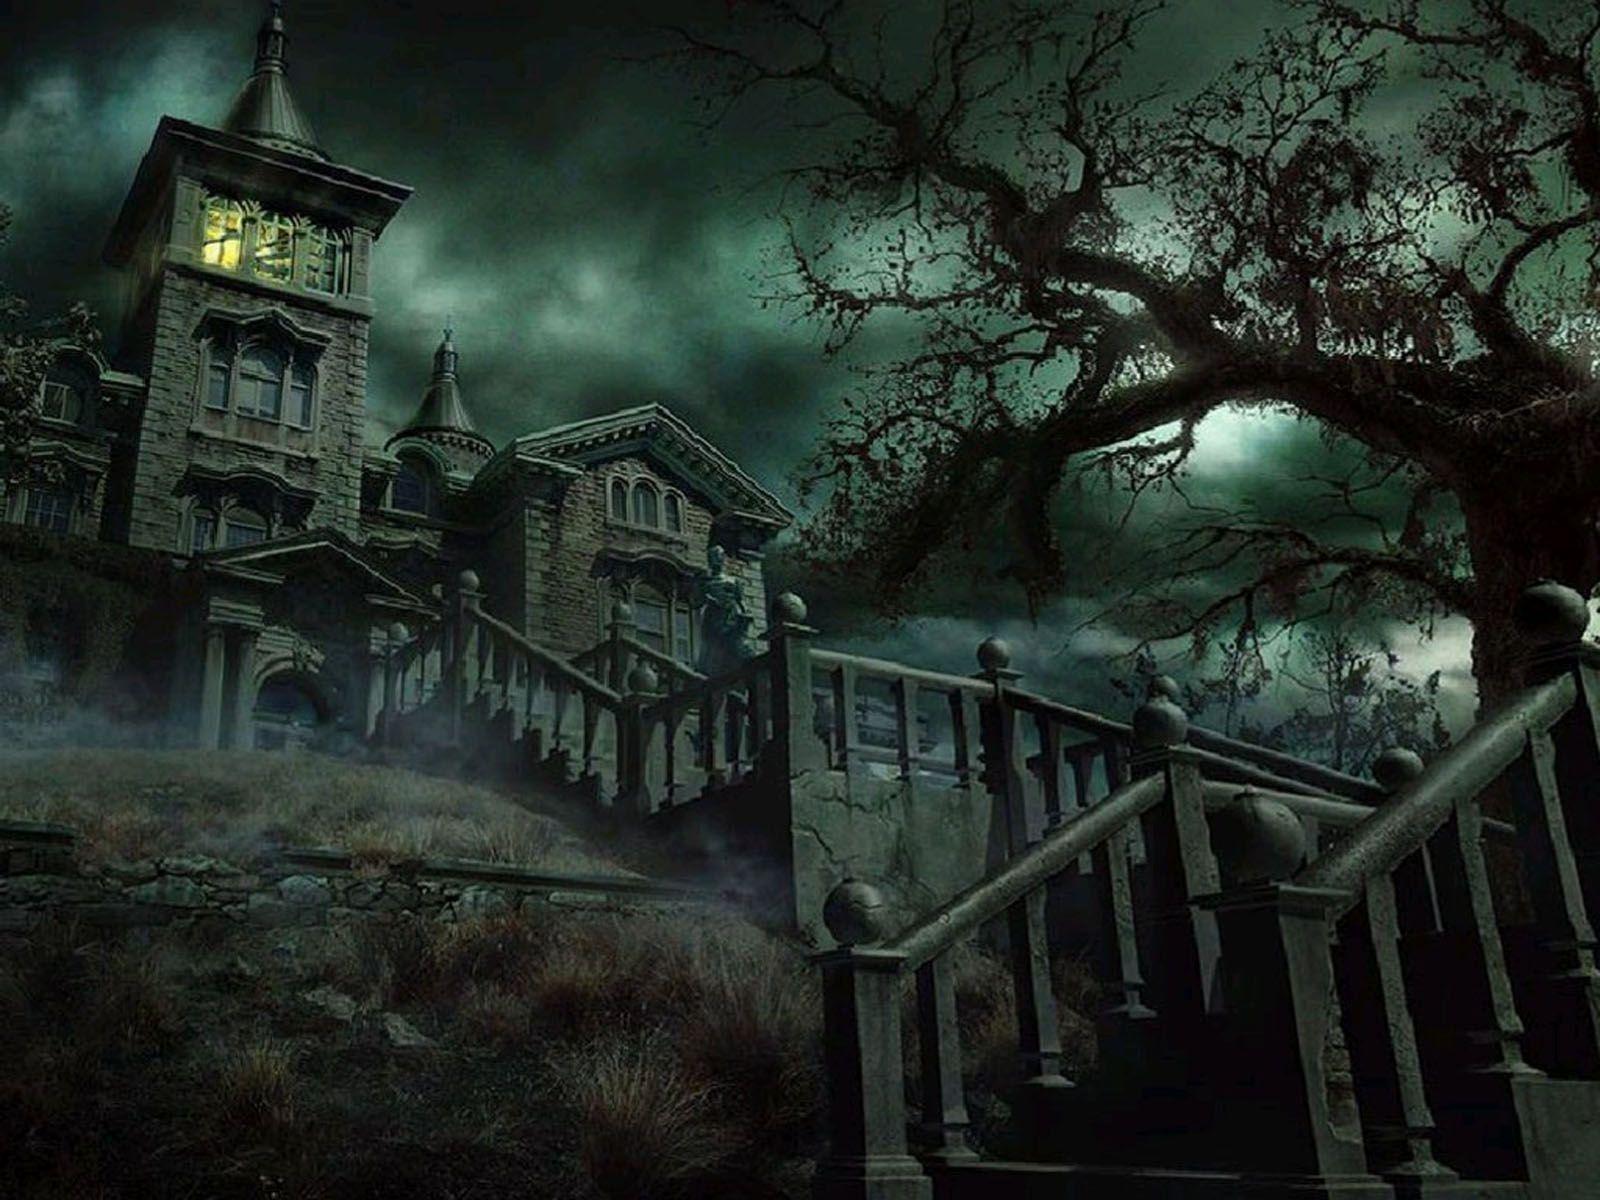 Haunted House in Fantasy